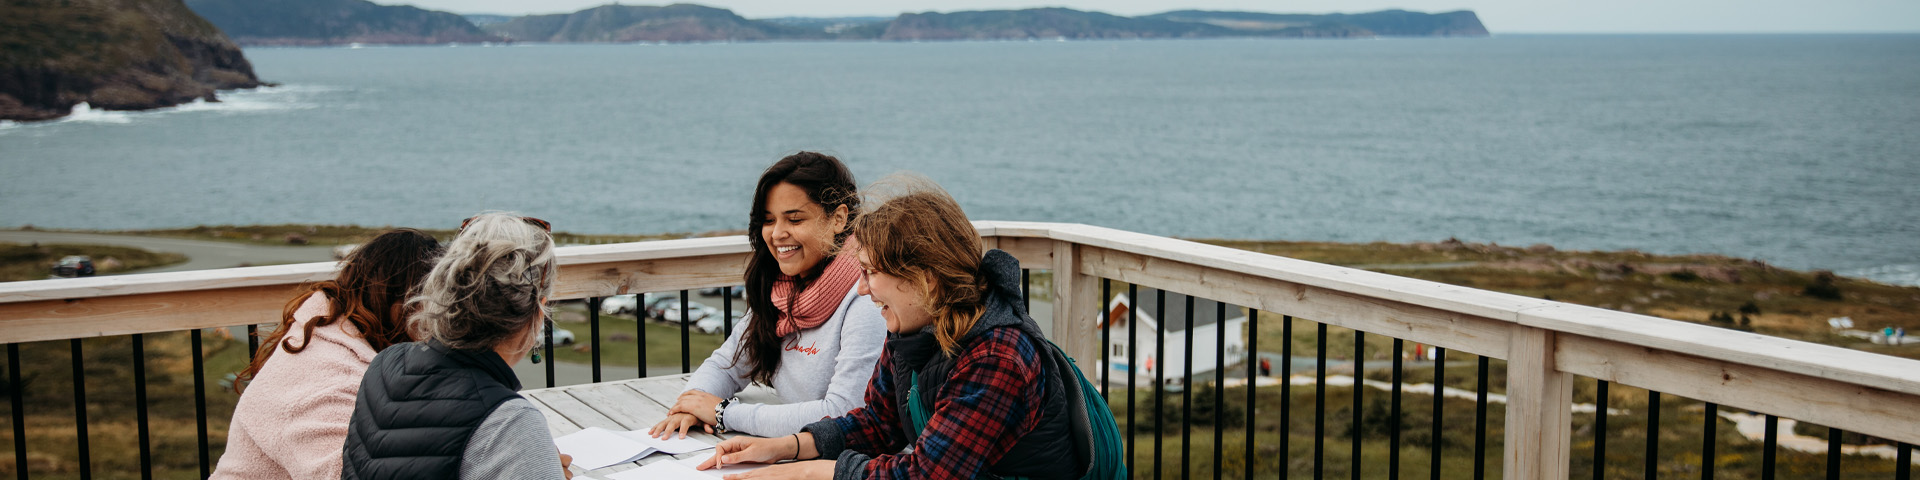 Four individuals laughing at a picnic table overlooking the ocean.